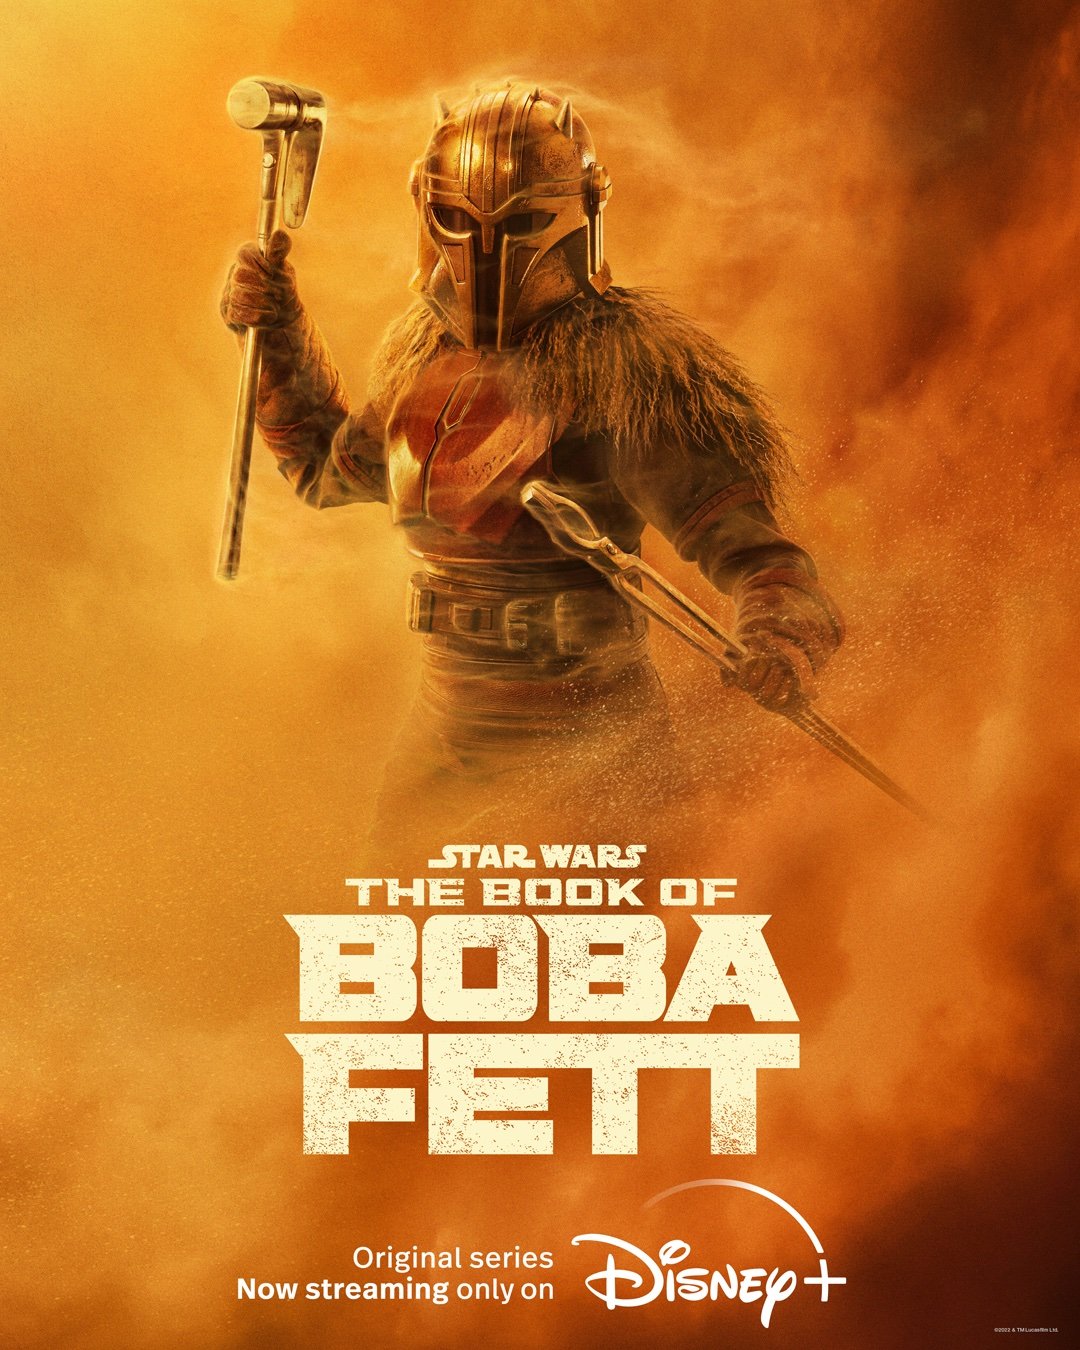 The Book of Boba Fett' Chapter 5 Character Posters Feature the Return of  the Mandalorian - Star Wars News Net